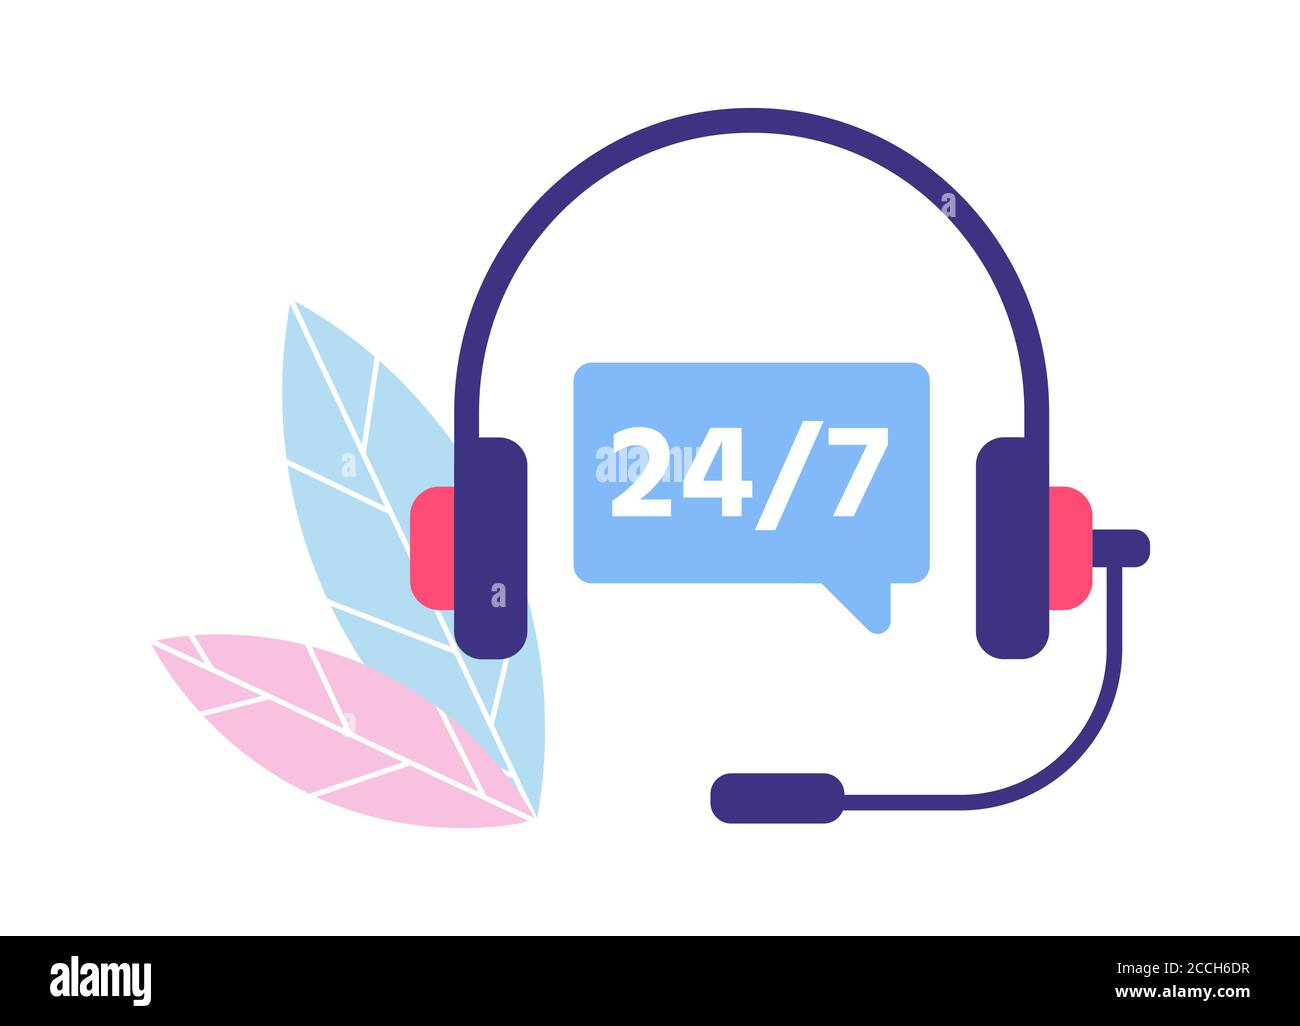 Customer service support. 24 7 personal assistant. Headphones symbol for operator. Consulting clients online Stock Vector